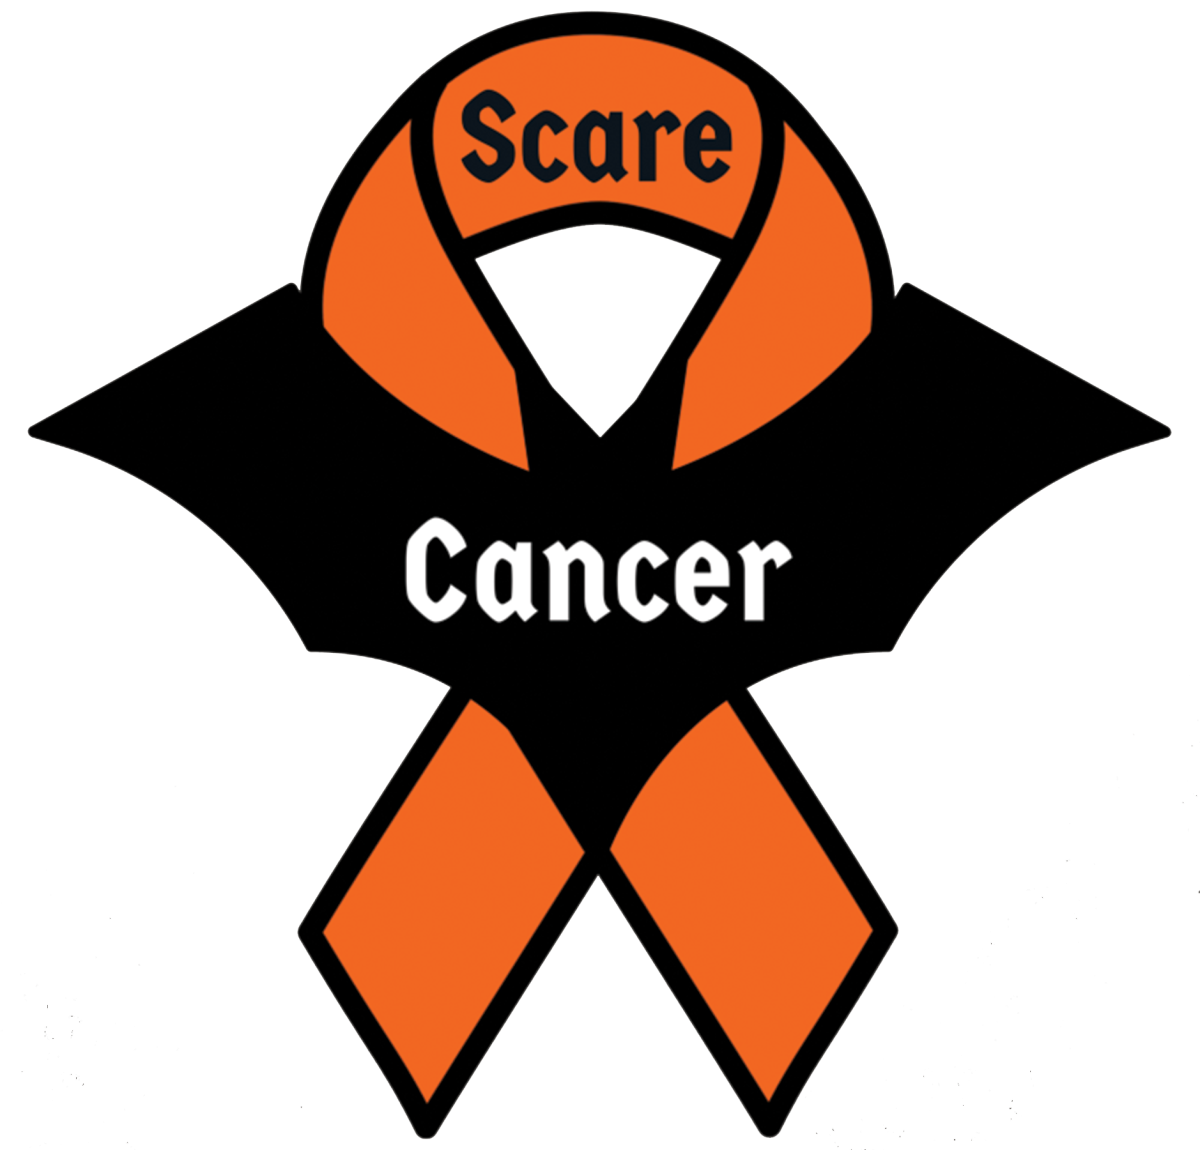 Scare Cancer 2017 - image